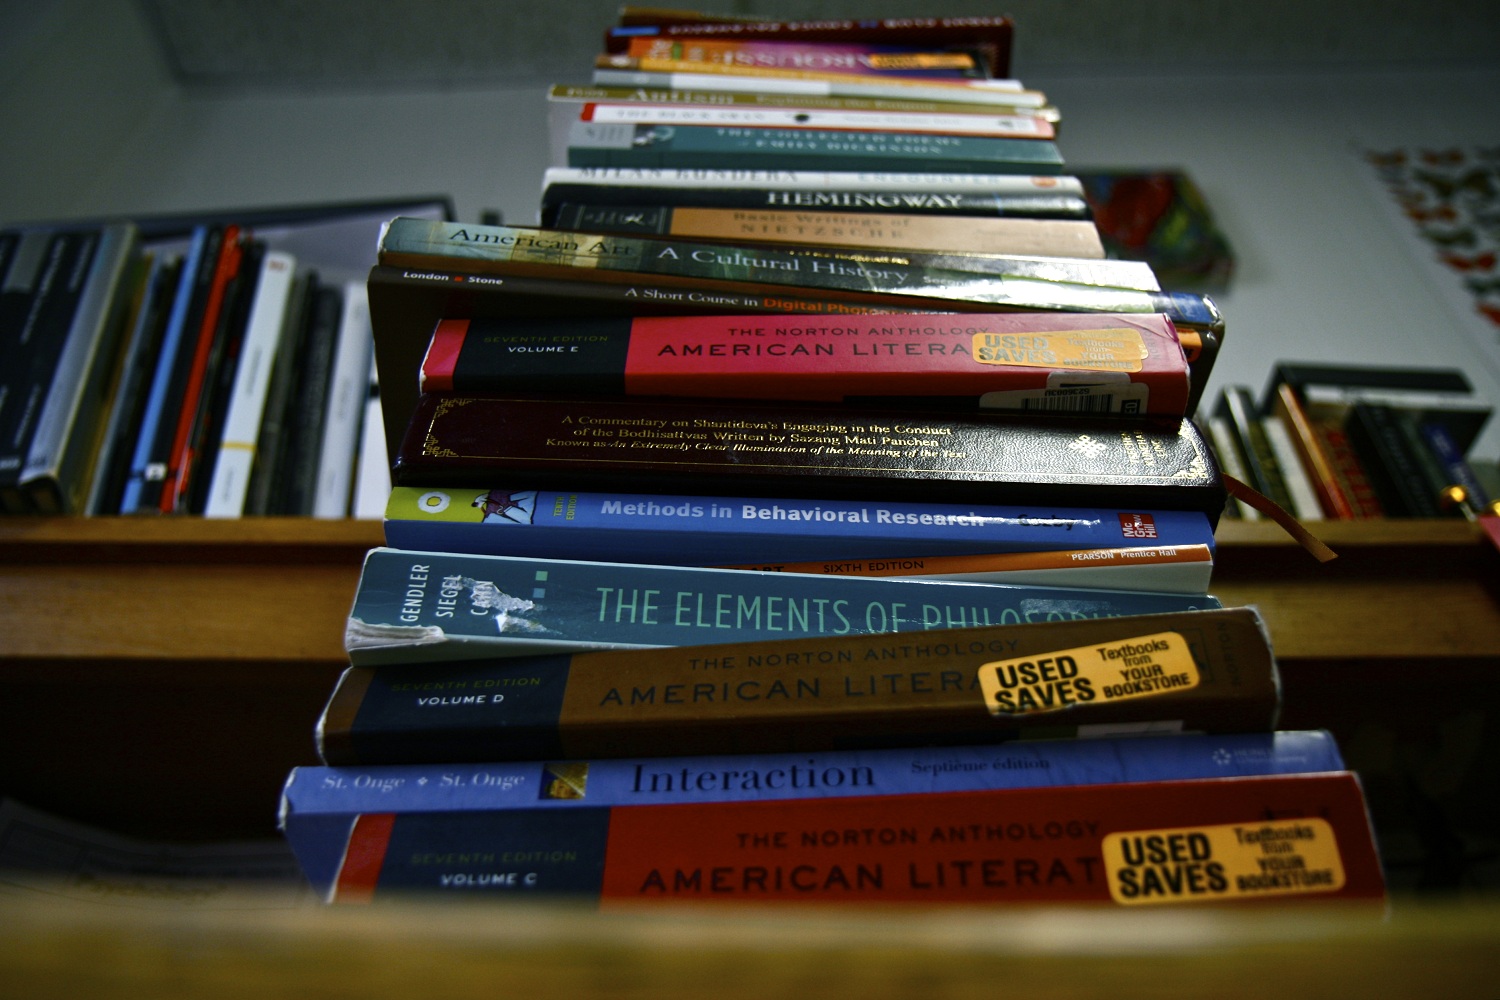 Between 2002 and 2012, college textbook prices rose 82% while overall consumer prices rose 28%